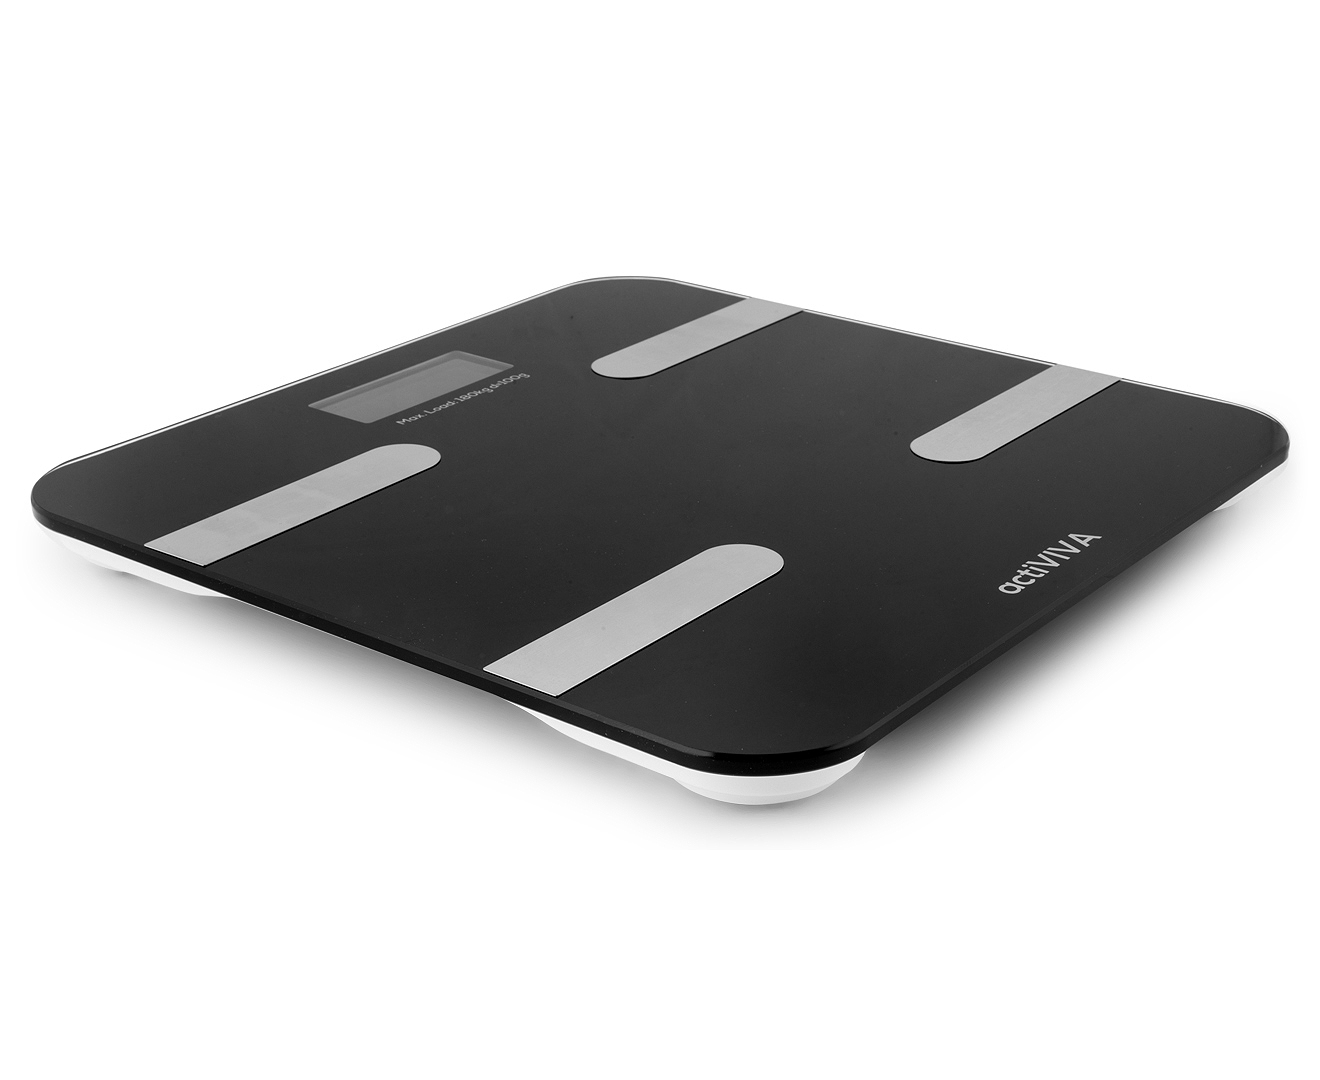 mbeat actiVIVA Bluetooth BMI and Body Fat Smart Scale with